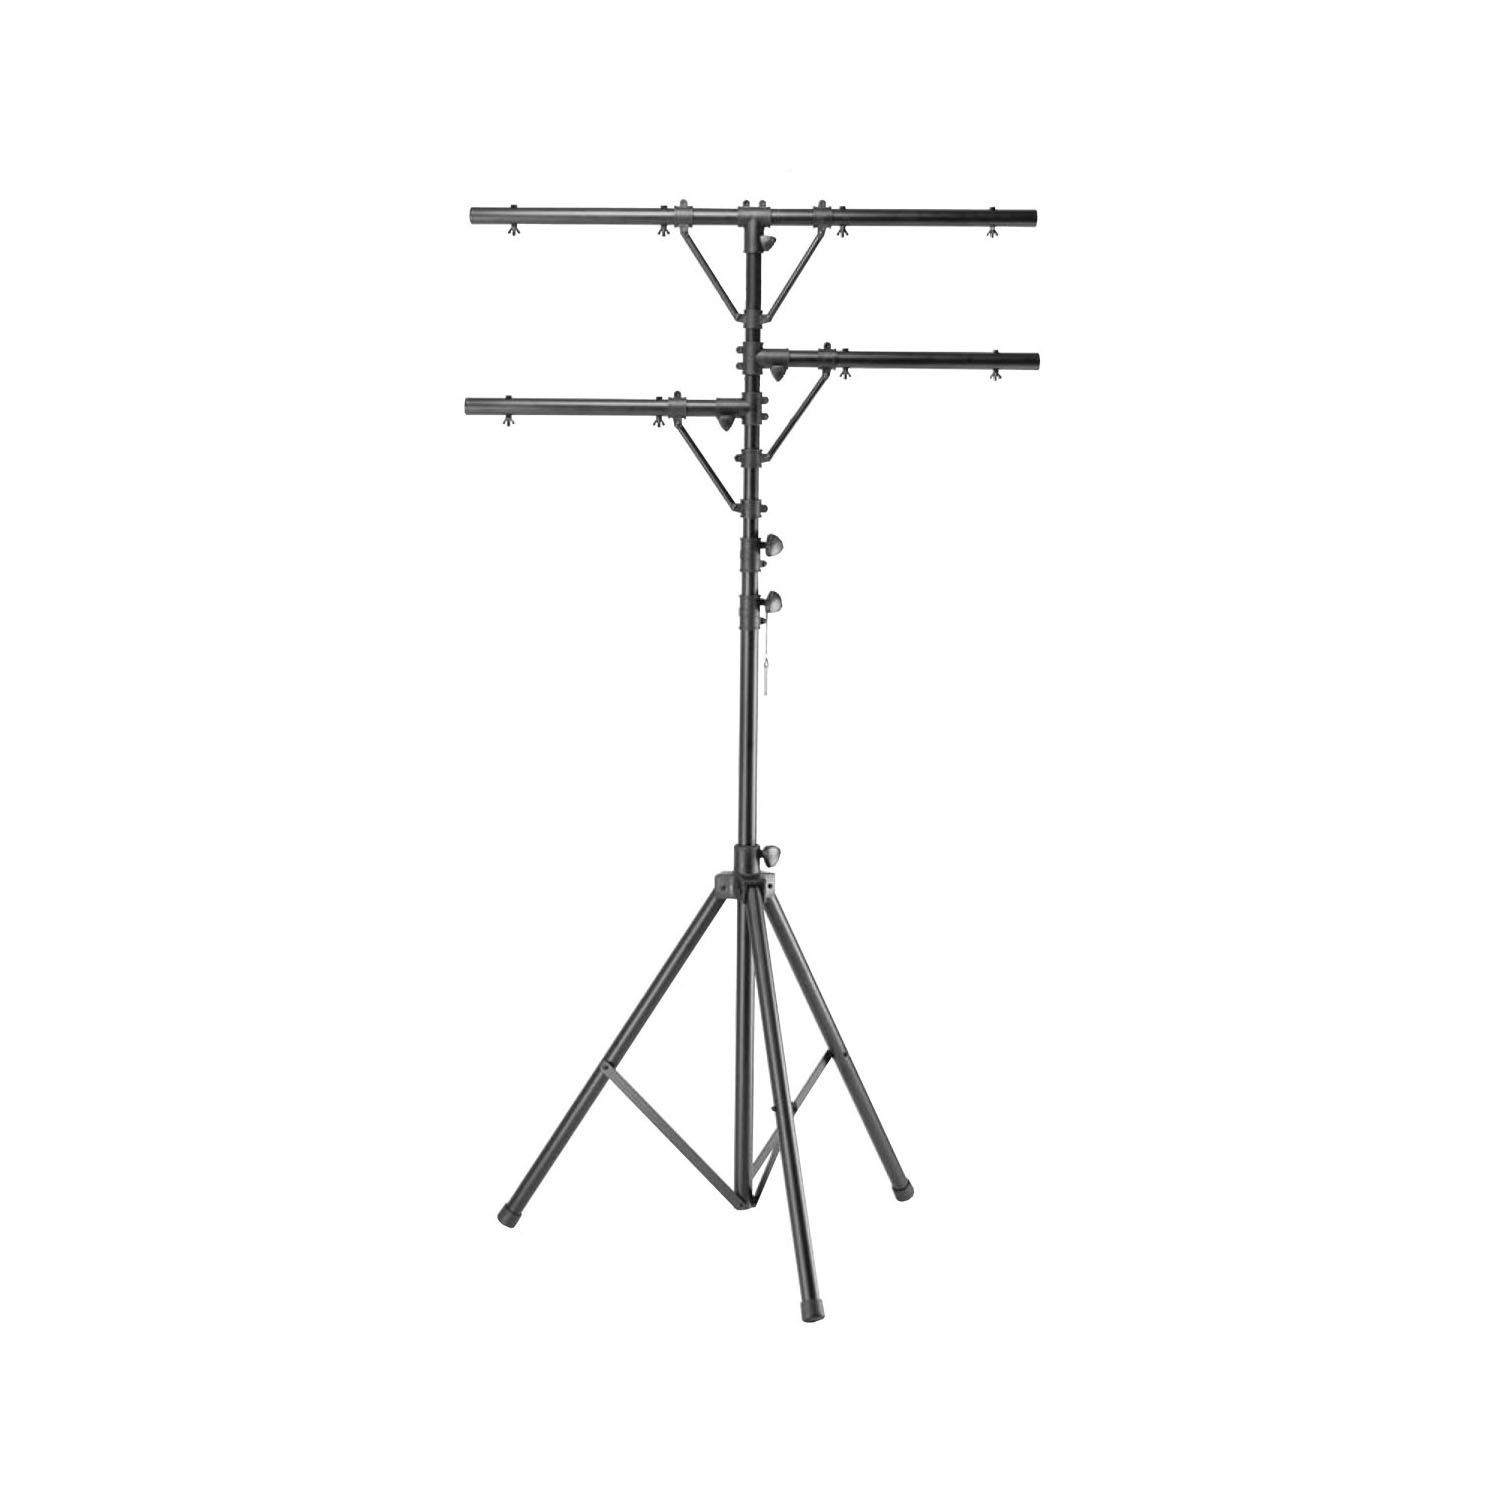 Sound Town Lighting Stand with Side Bars and Tripod Base